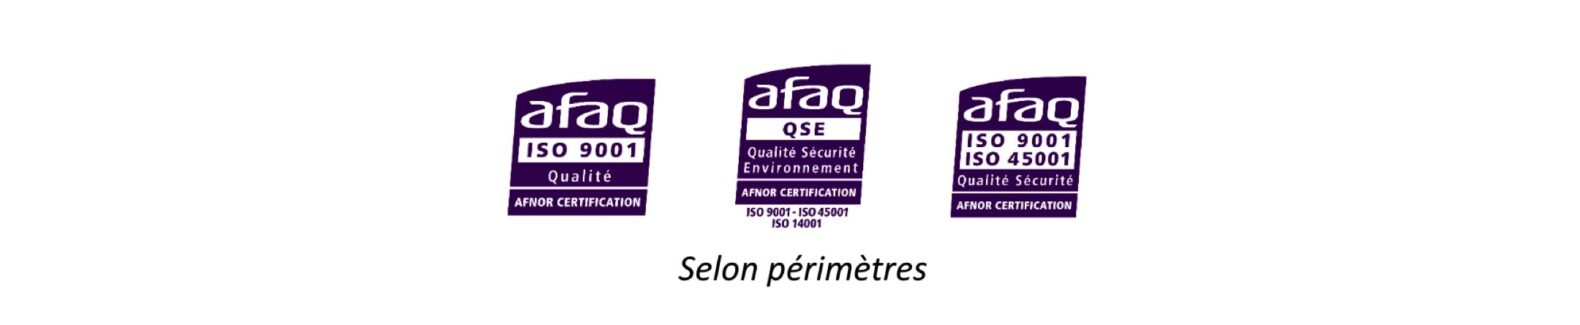 afaq-certification-iso9001-iso45001